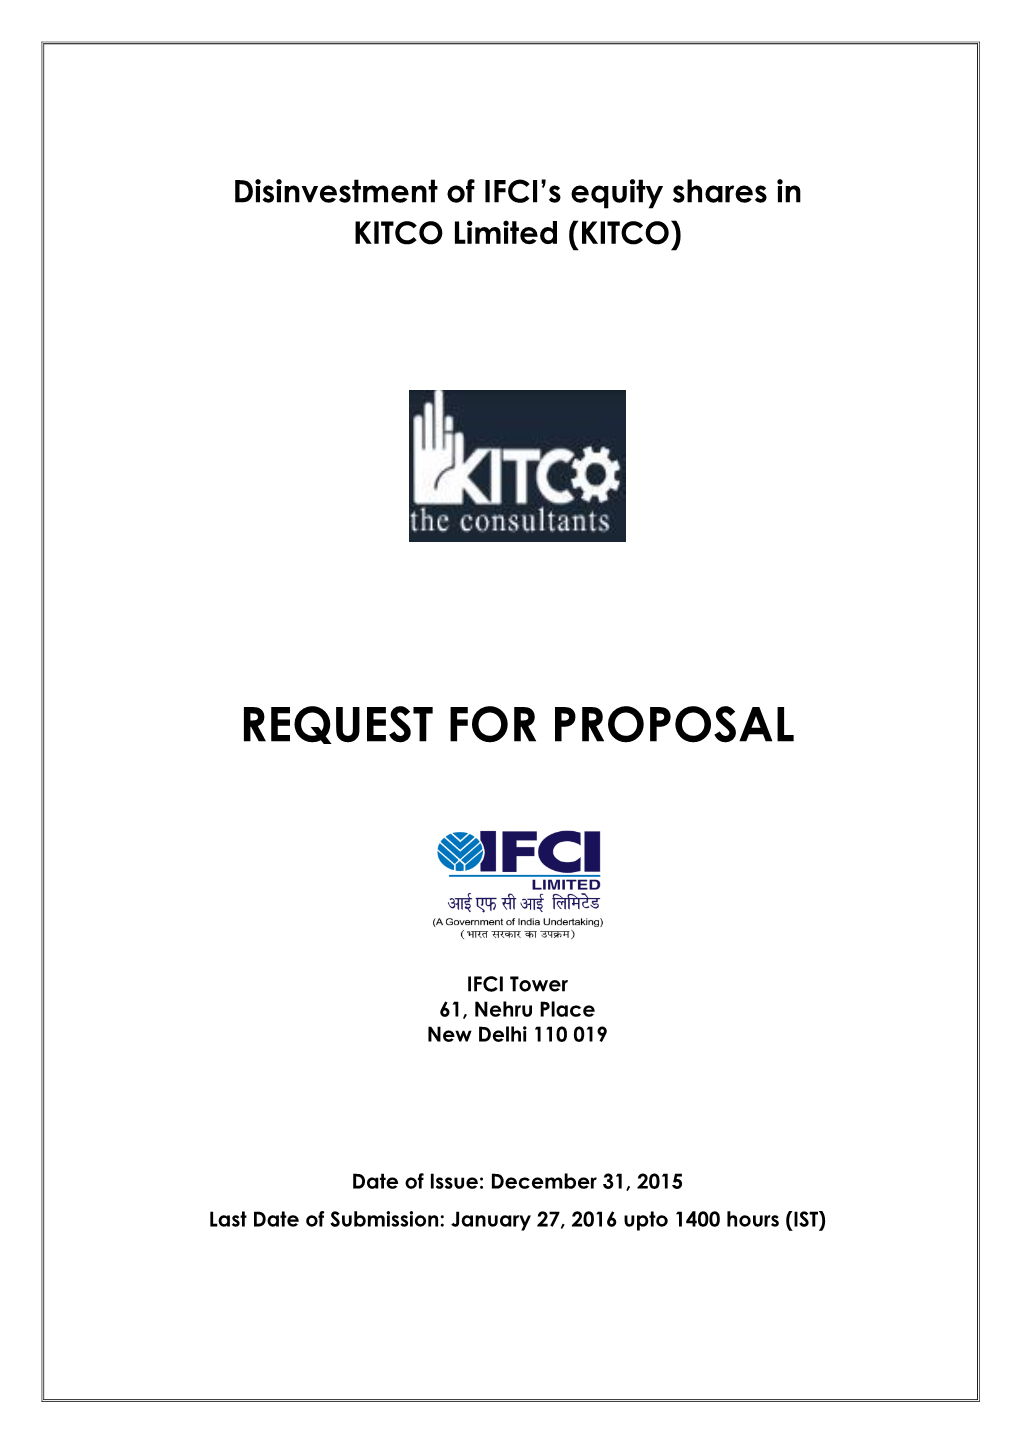 Disinvestment of IFCI's Equity Shares in KITCO Limited